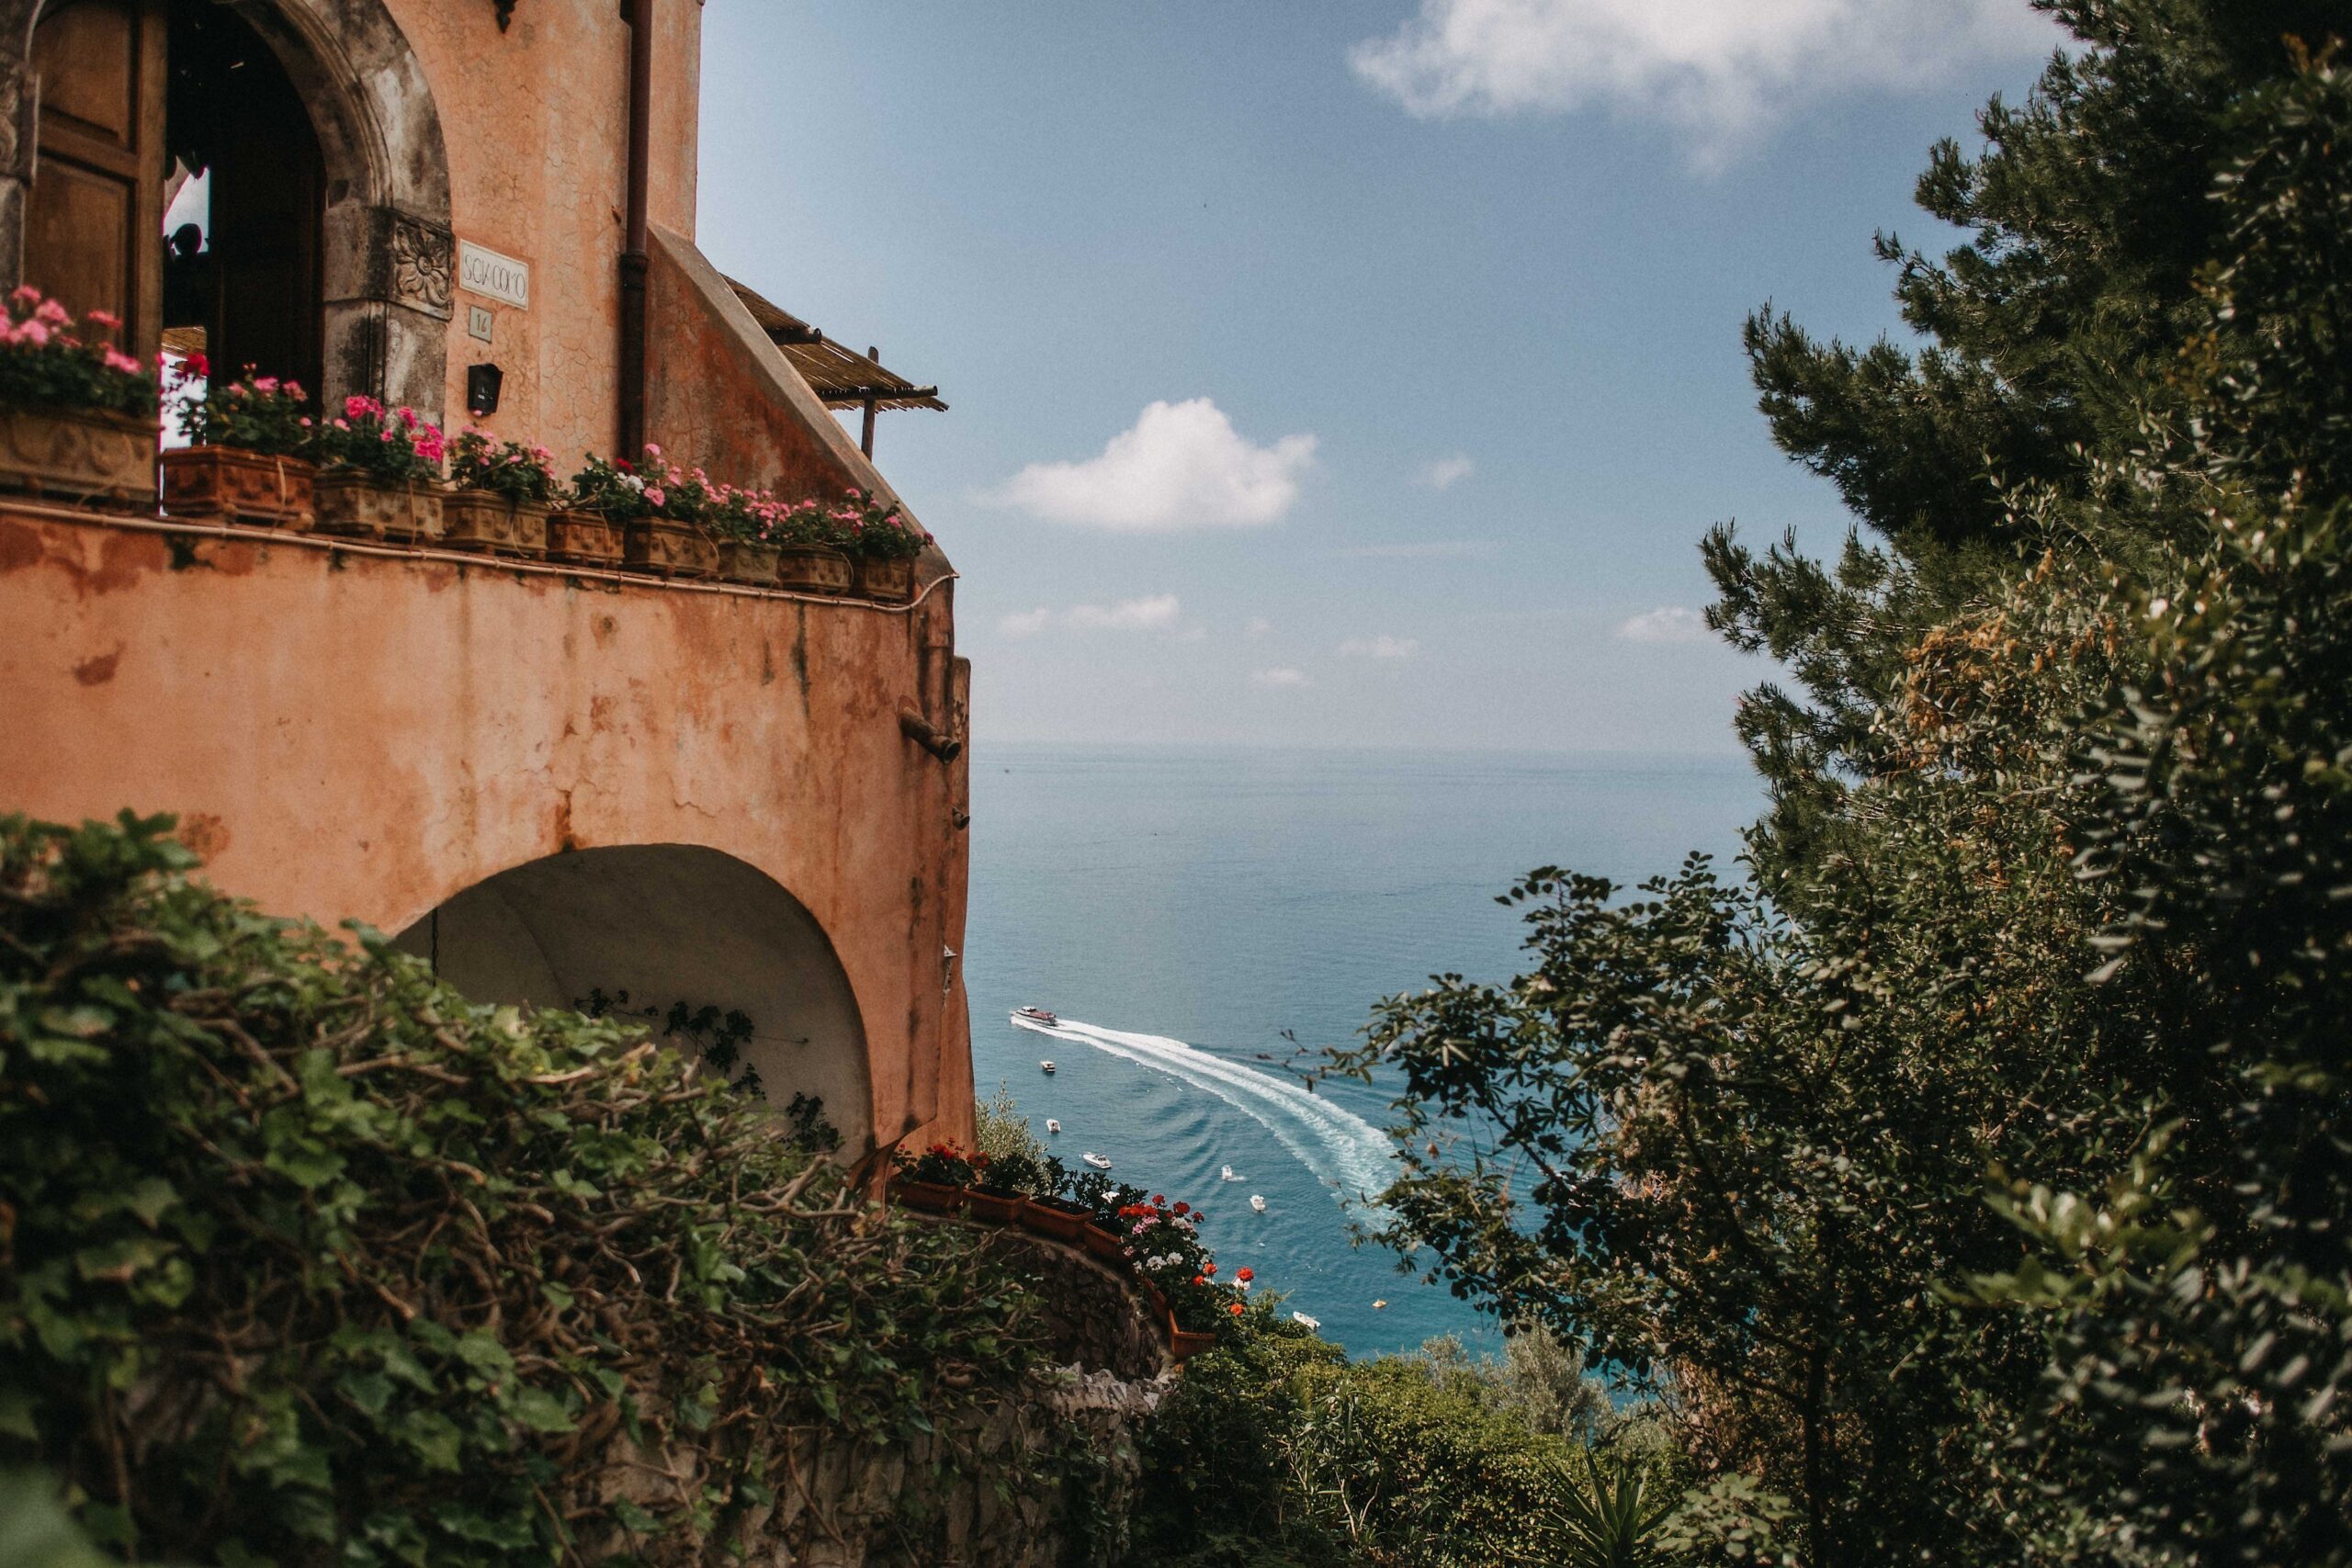 a Tuscan villa on the left looks out onto the ocean, a yacht cruises on the water in the distance